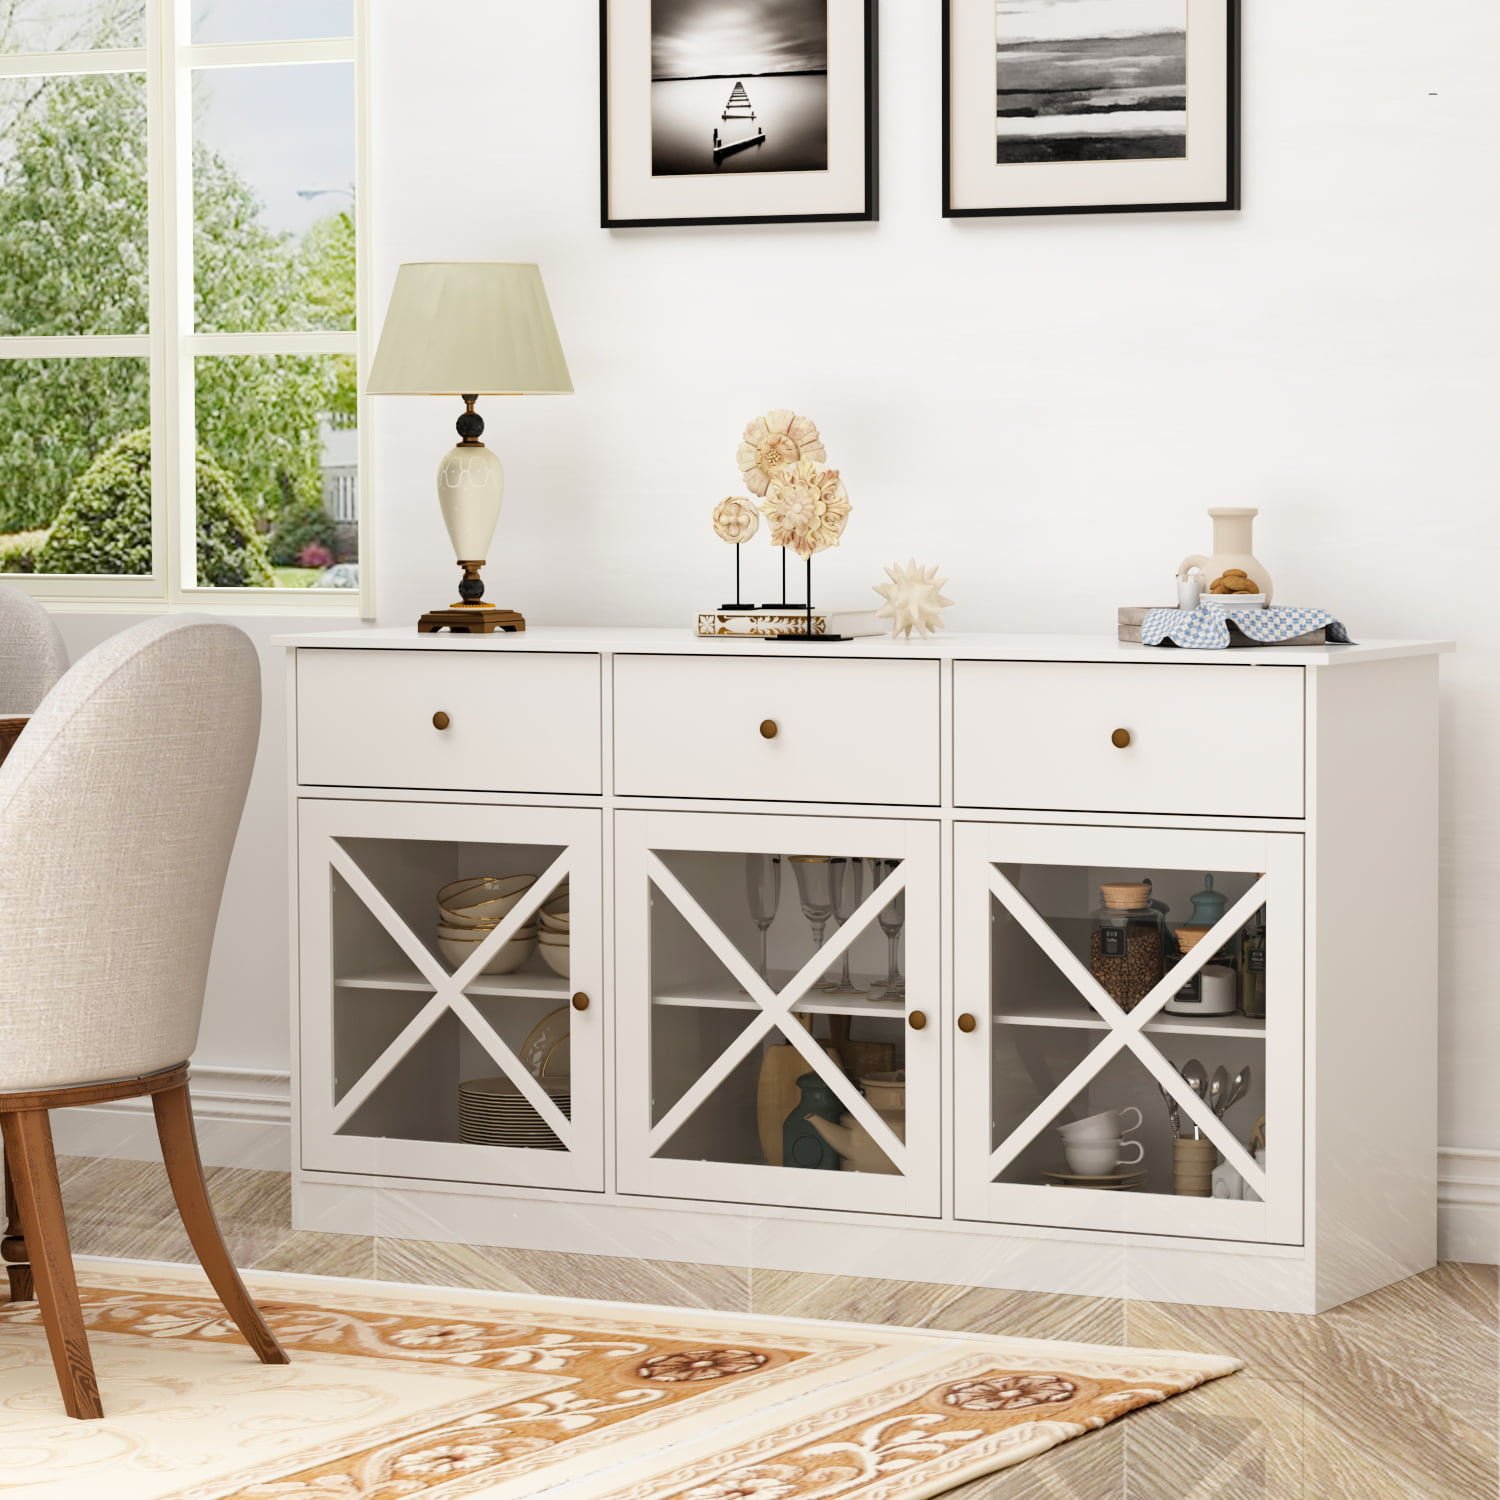 FUFU&GAGA Sideboard Buffet Storage Cabinet with 3 Drawers and Acrylic ...